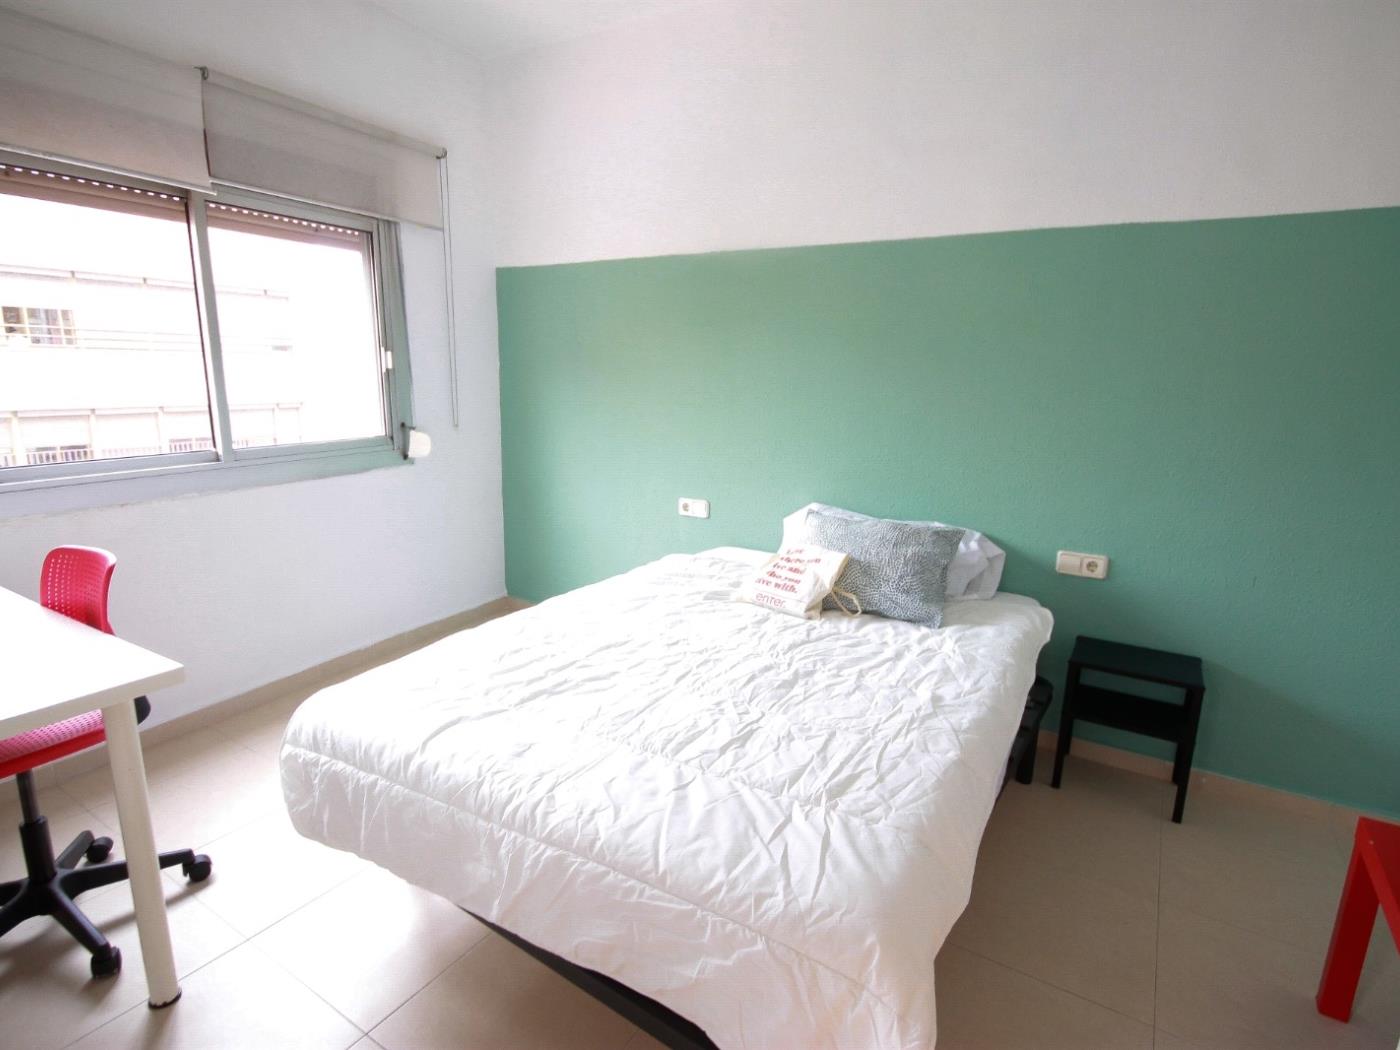 Bright and renovated room very close to Badal subway station - My Space Barcelona Apartments